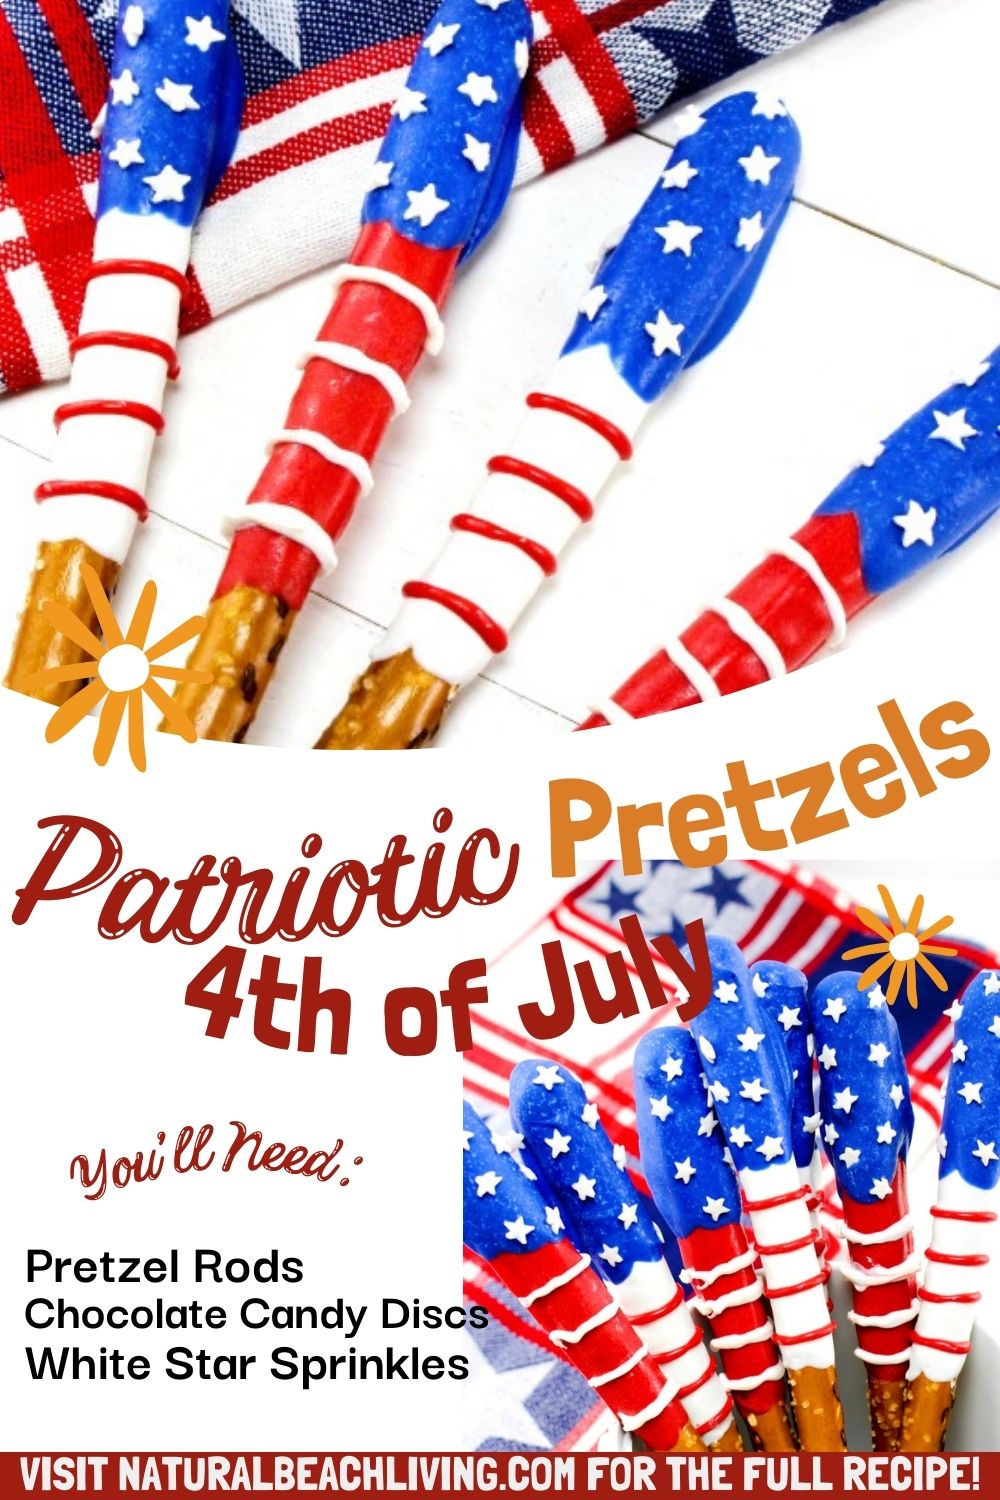 How to Make Chocolate Covered Pretzels for 4th of July, Snacks for Memorial Day, 4th of July, Summer treat or Party food, these Chocolate Pretzels are delicious and look amazing on a party table, Summer Snacks, 4th of July Snacks, 4th of July Recipes